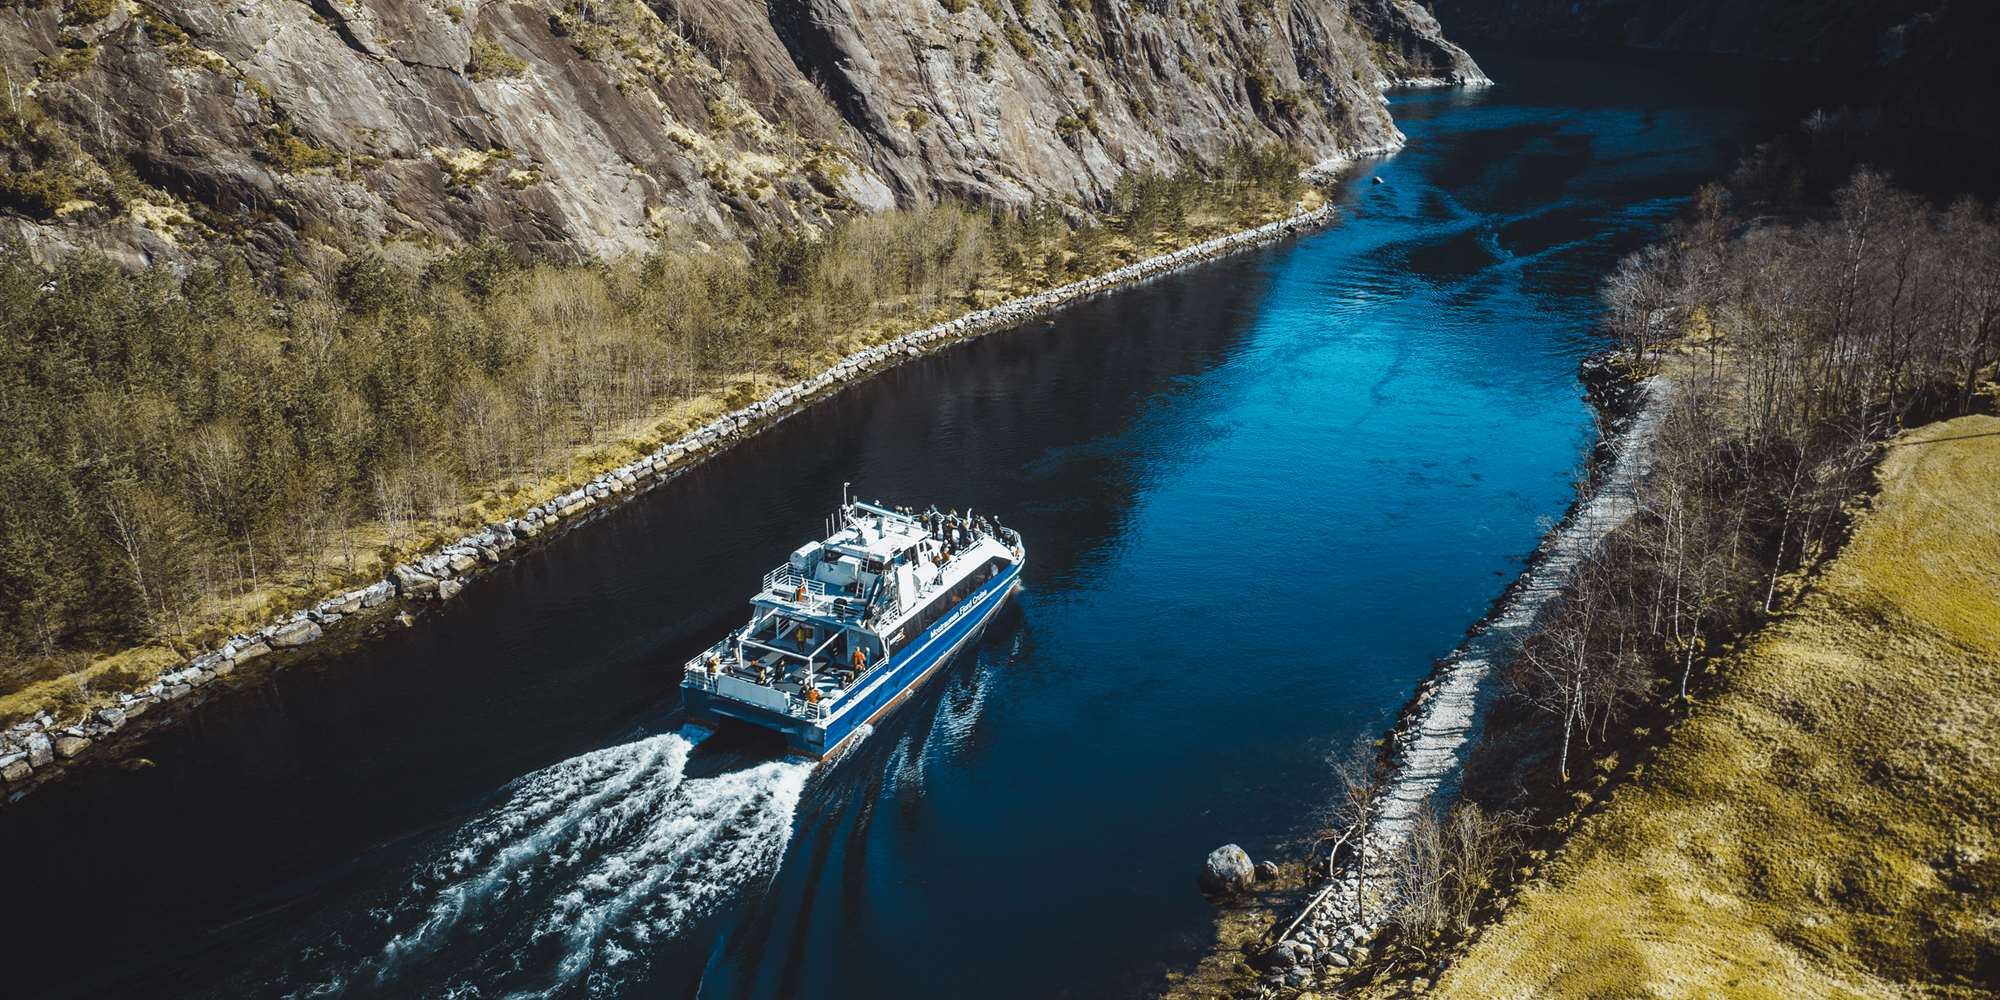 The fjord cruise passes through the narrow Mostraumen